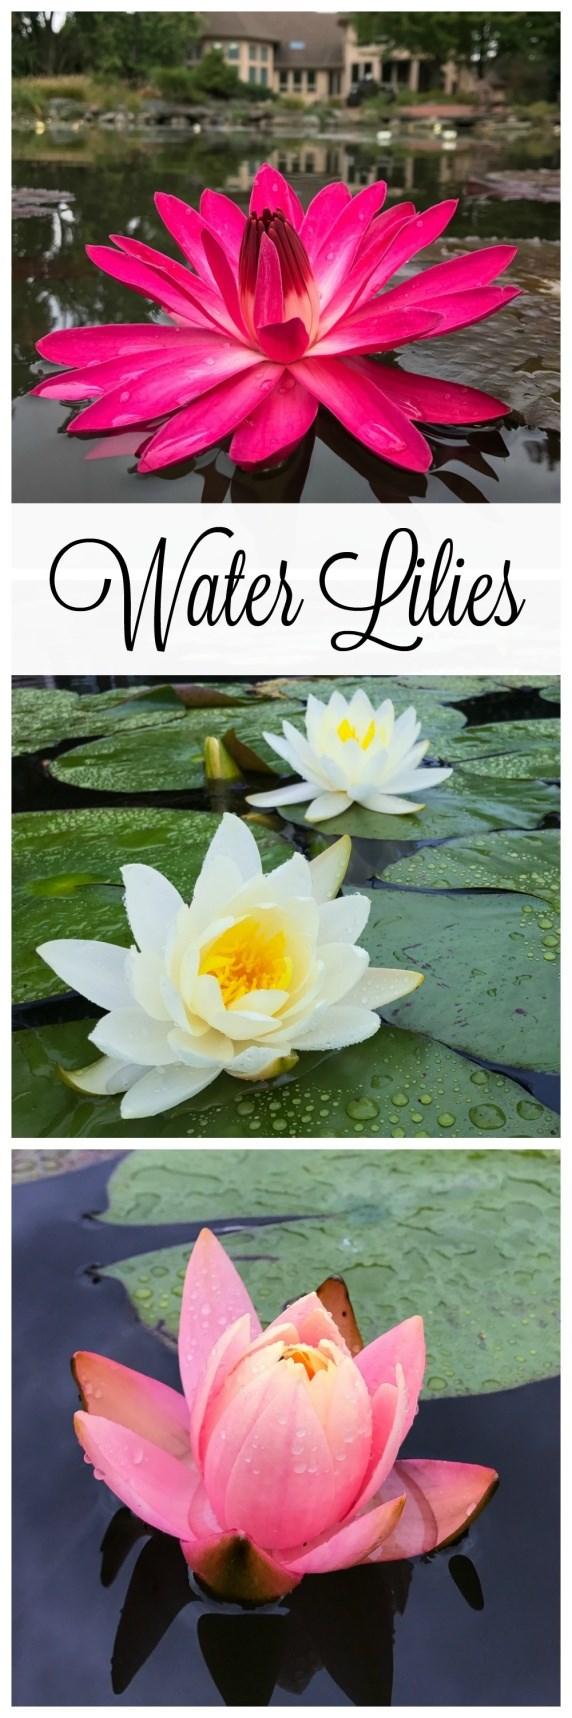 COLD WEATHER CARE FOR WATER LILIES Aquascape October 4, 2016 Fall is a bittersweet season for pond enthusiasts.